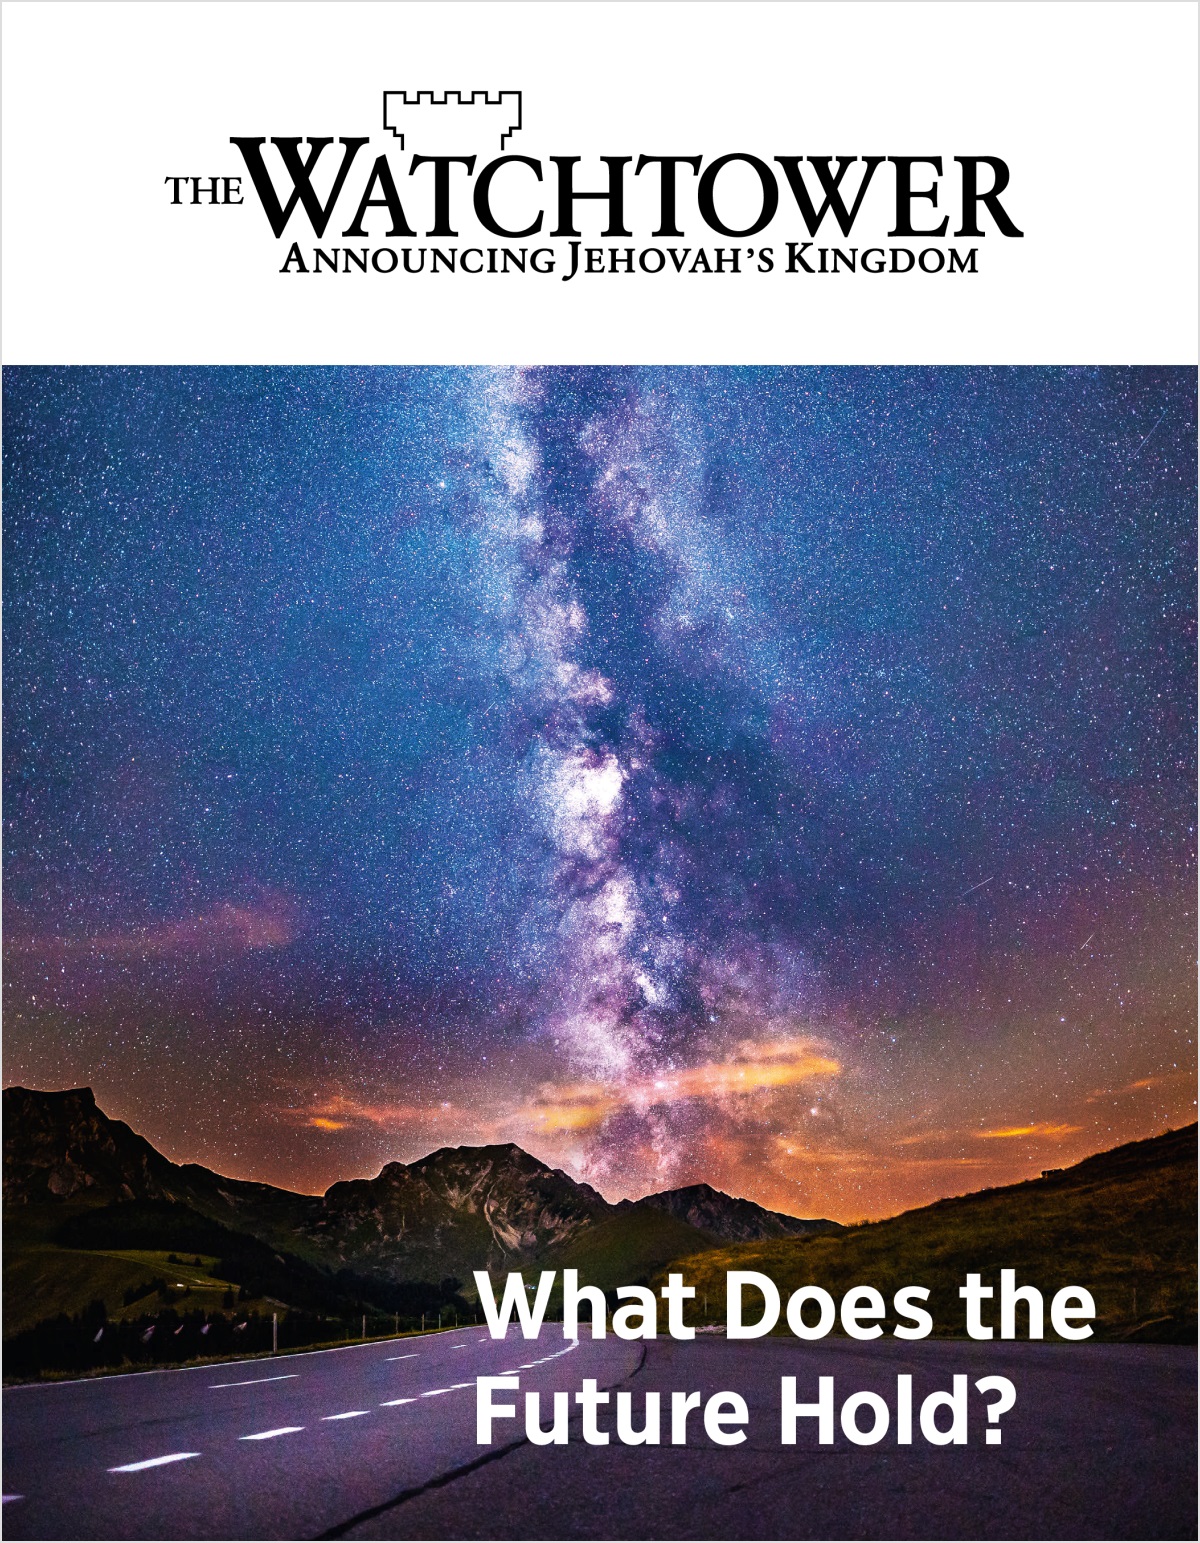 The Watchtower magazine, No. 2, 2018 | What Does the Future Hold?